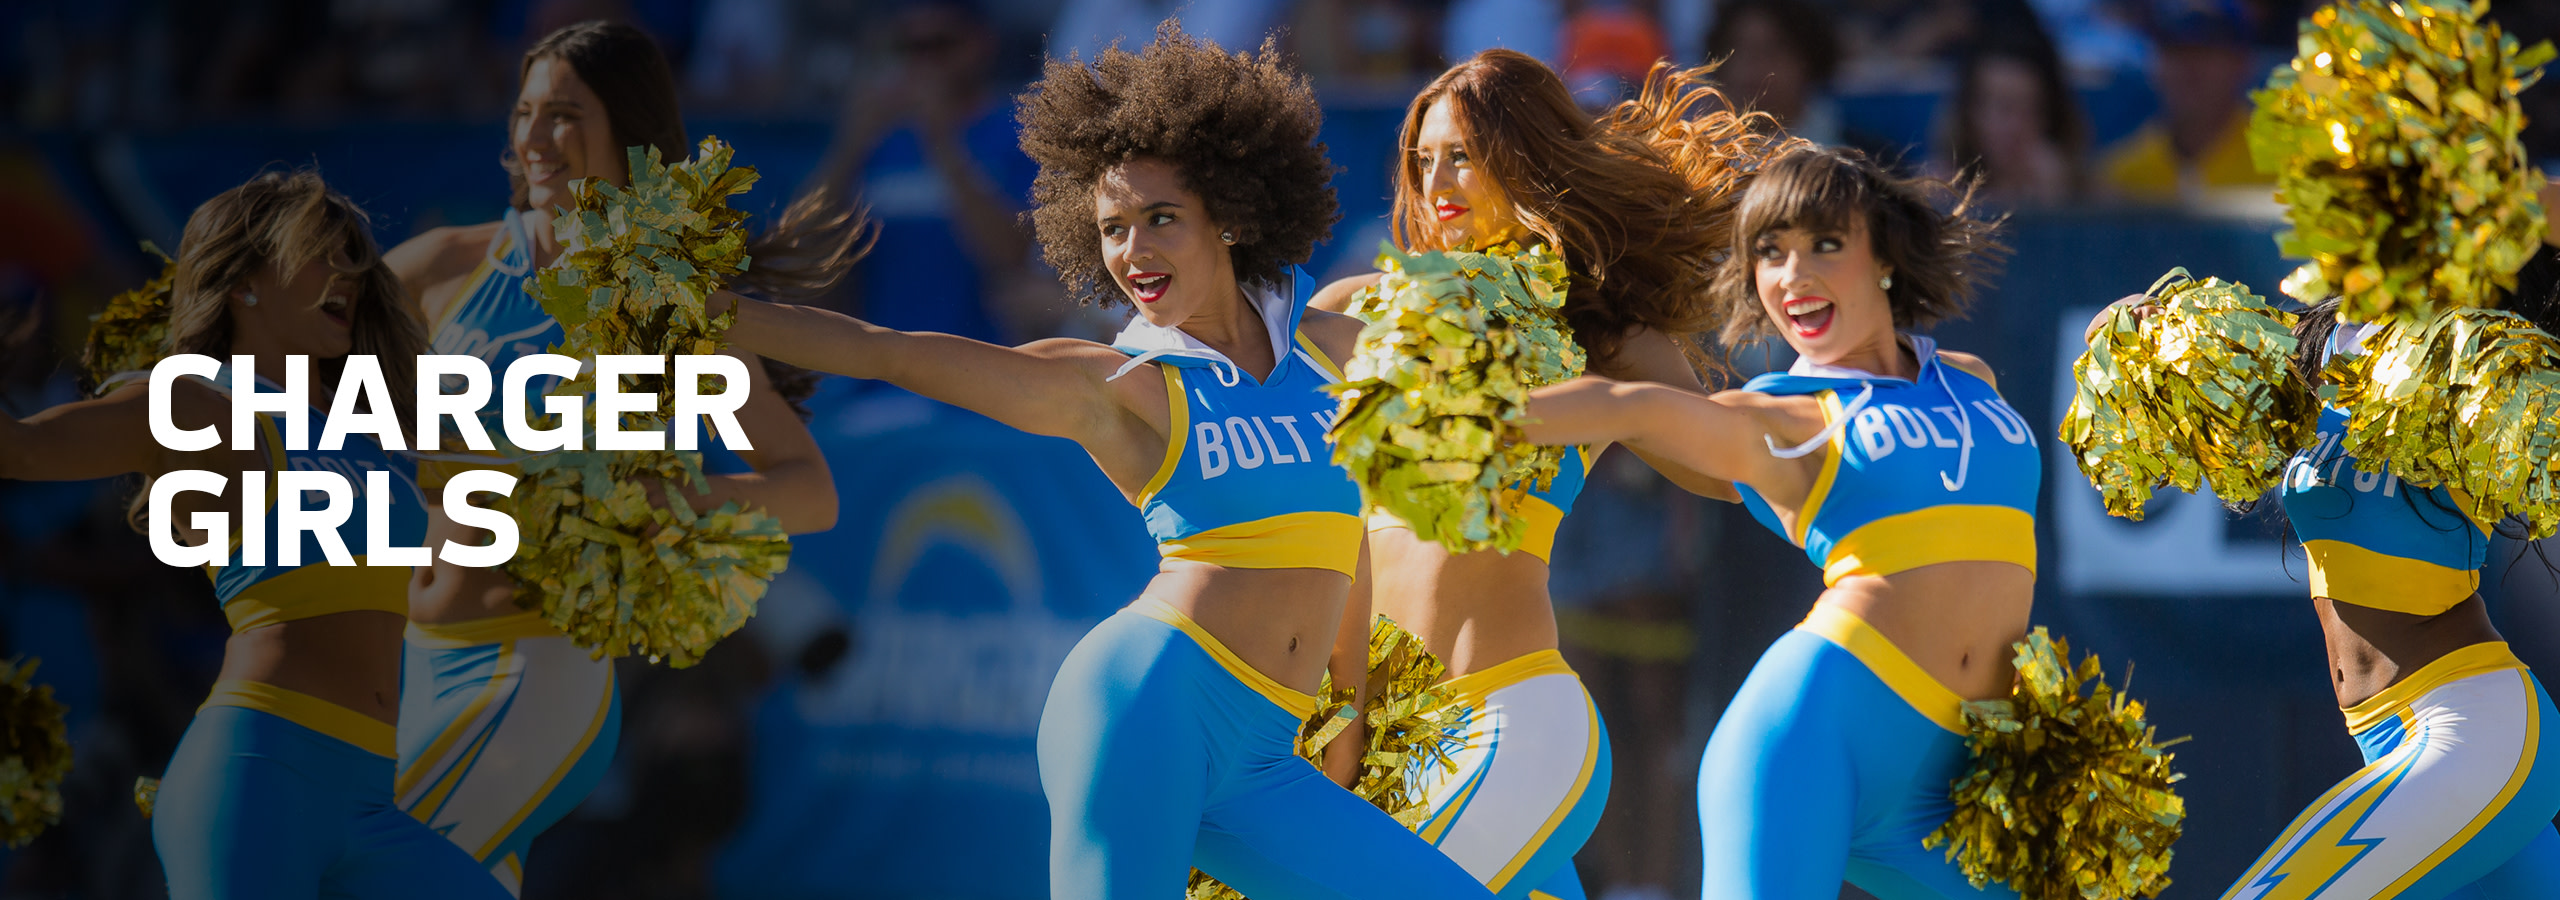 Charger Girls Los Angeles Chargers Chargerscom - roblox id song cheerleader youtube